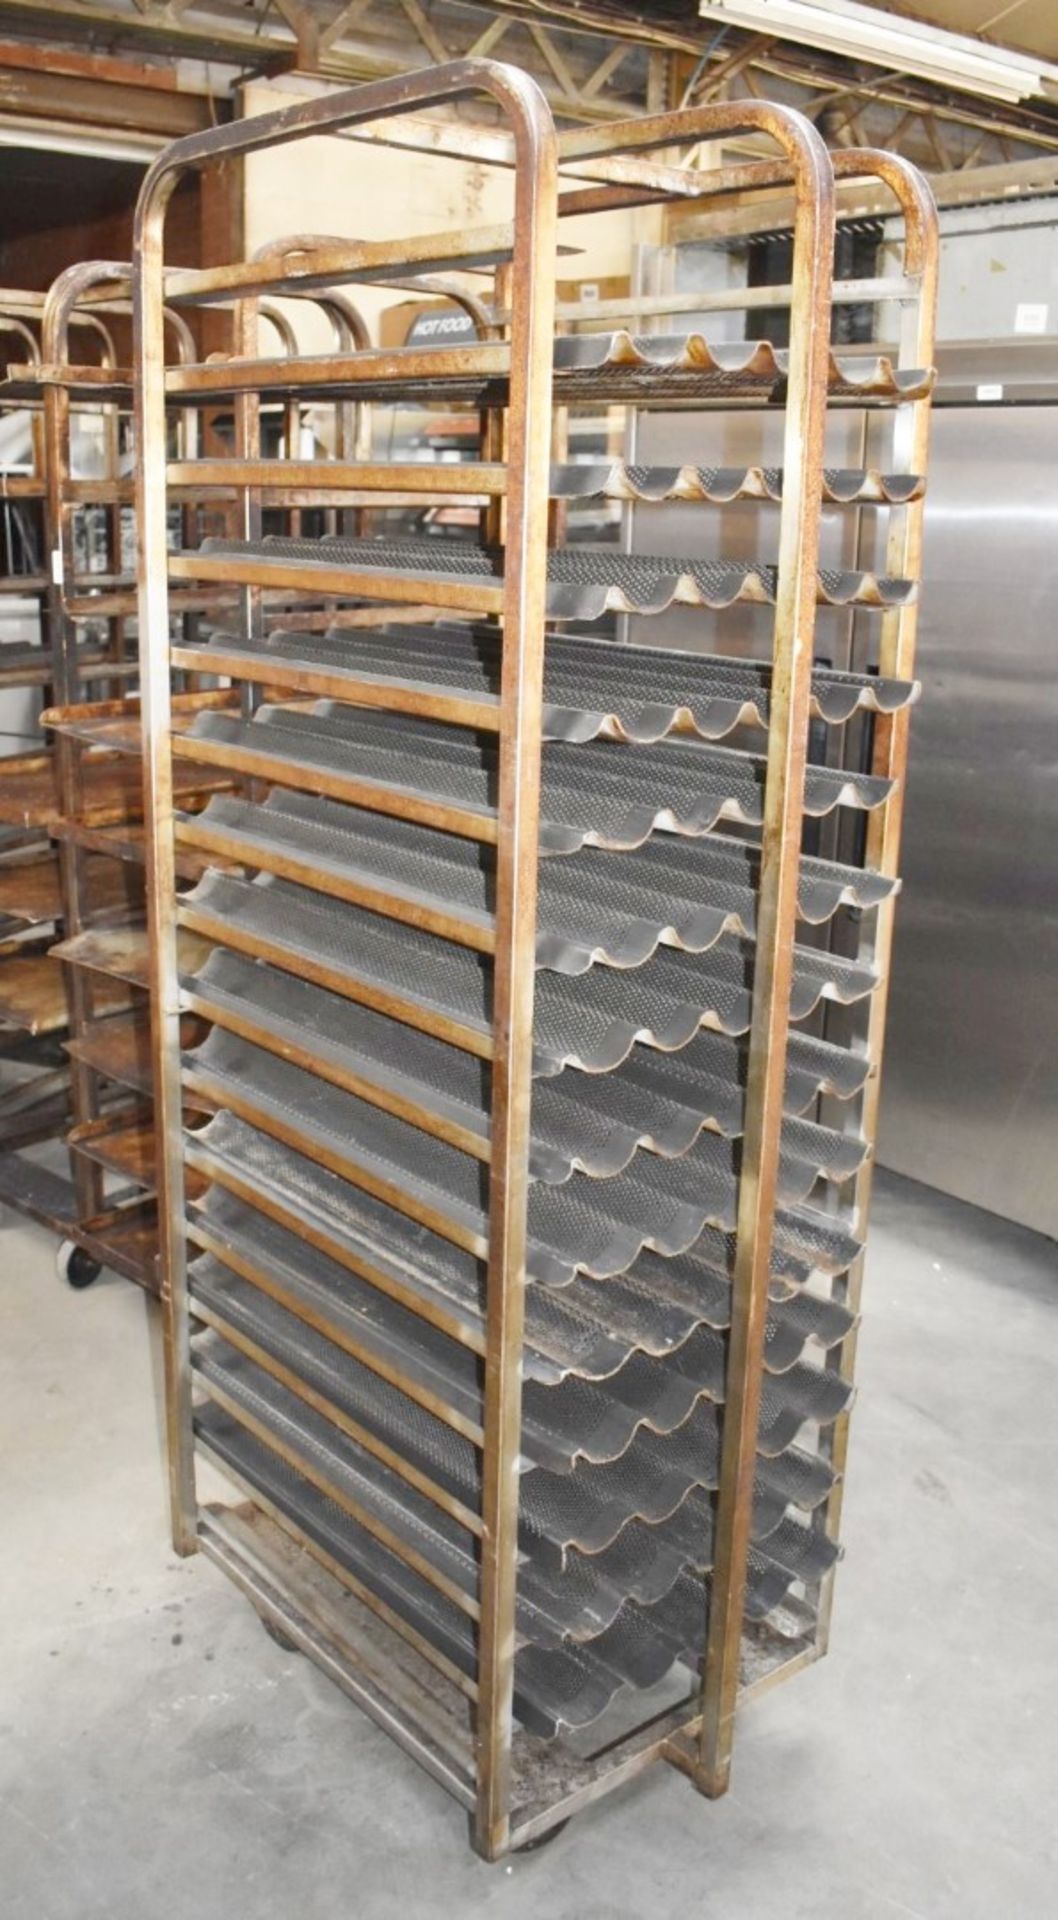 1 x Upright Mobile Baking Rack With Fourteen Baguette Trays - Image 6 of 6